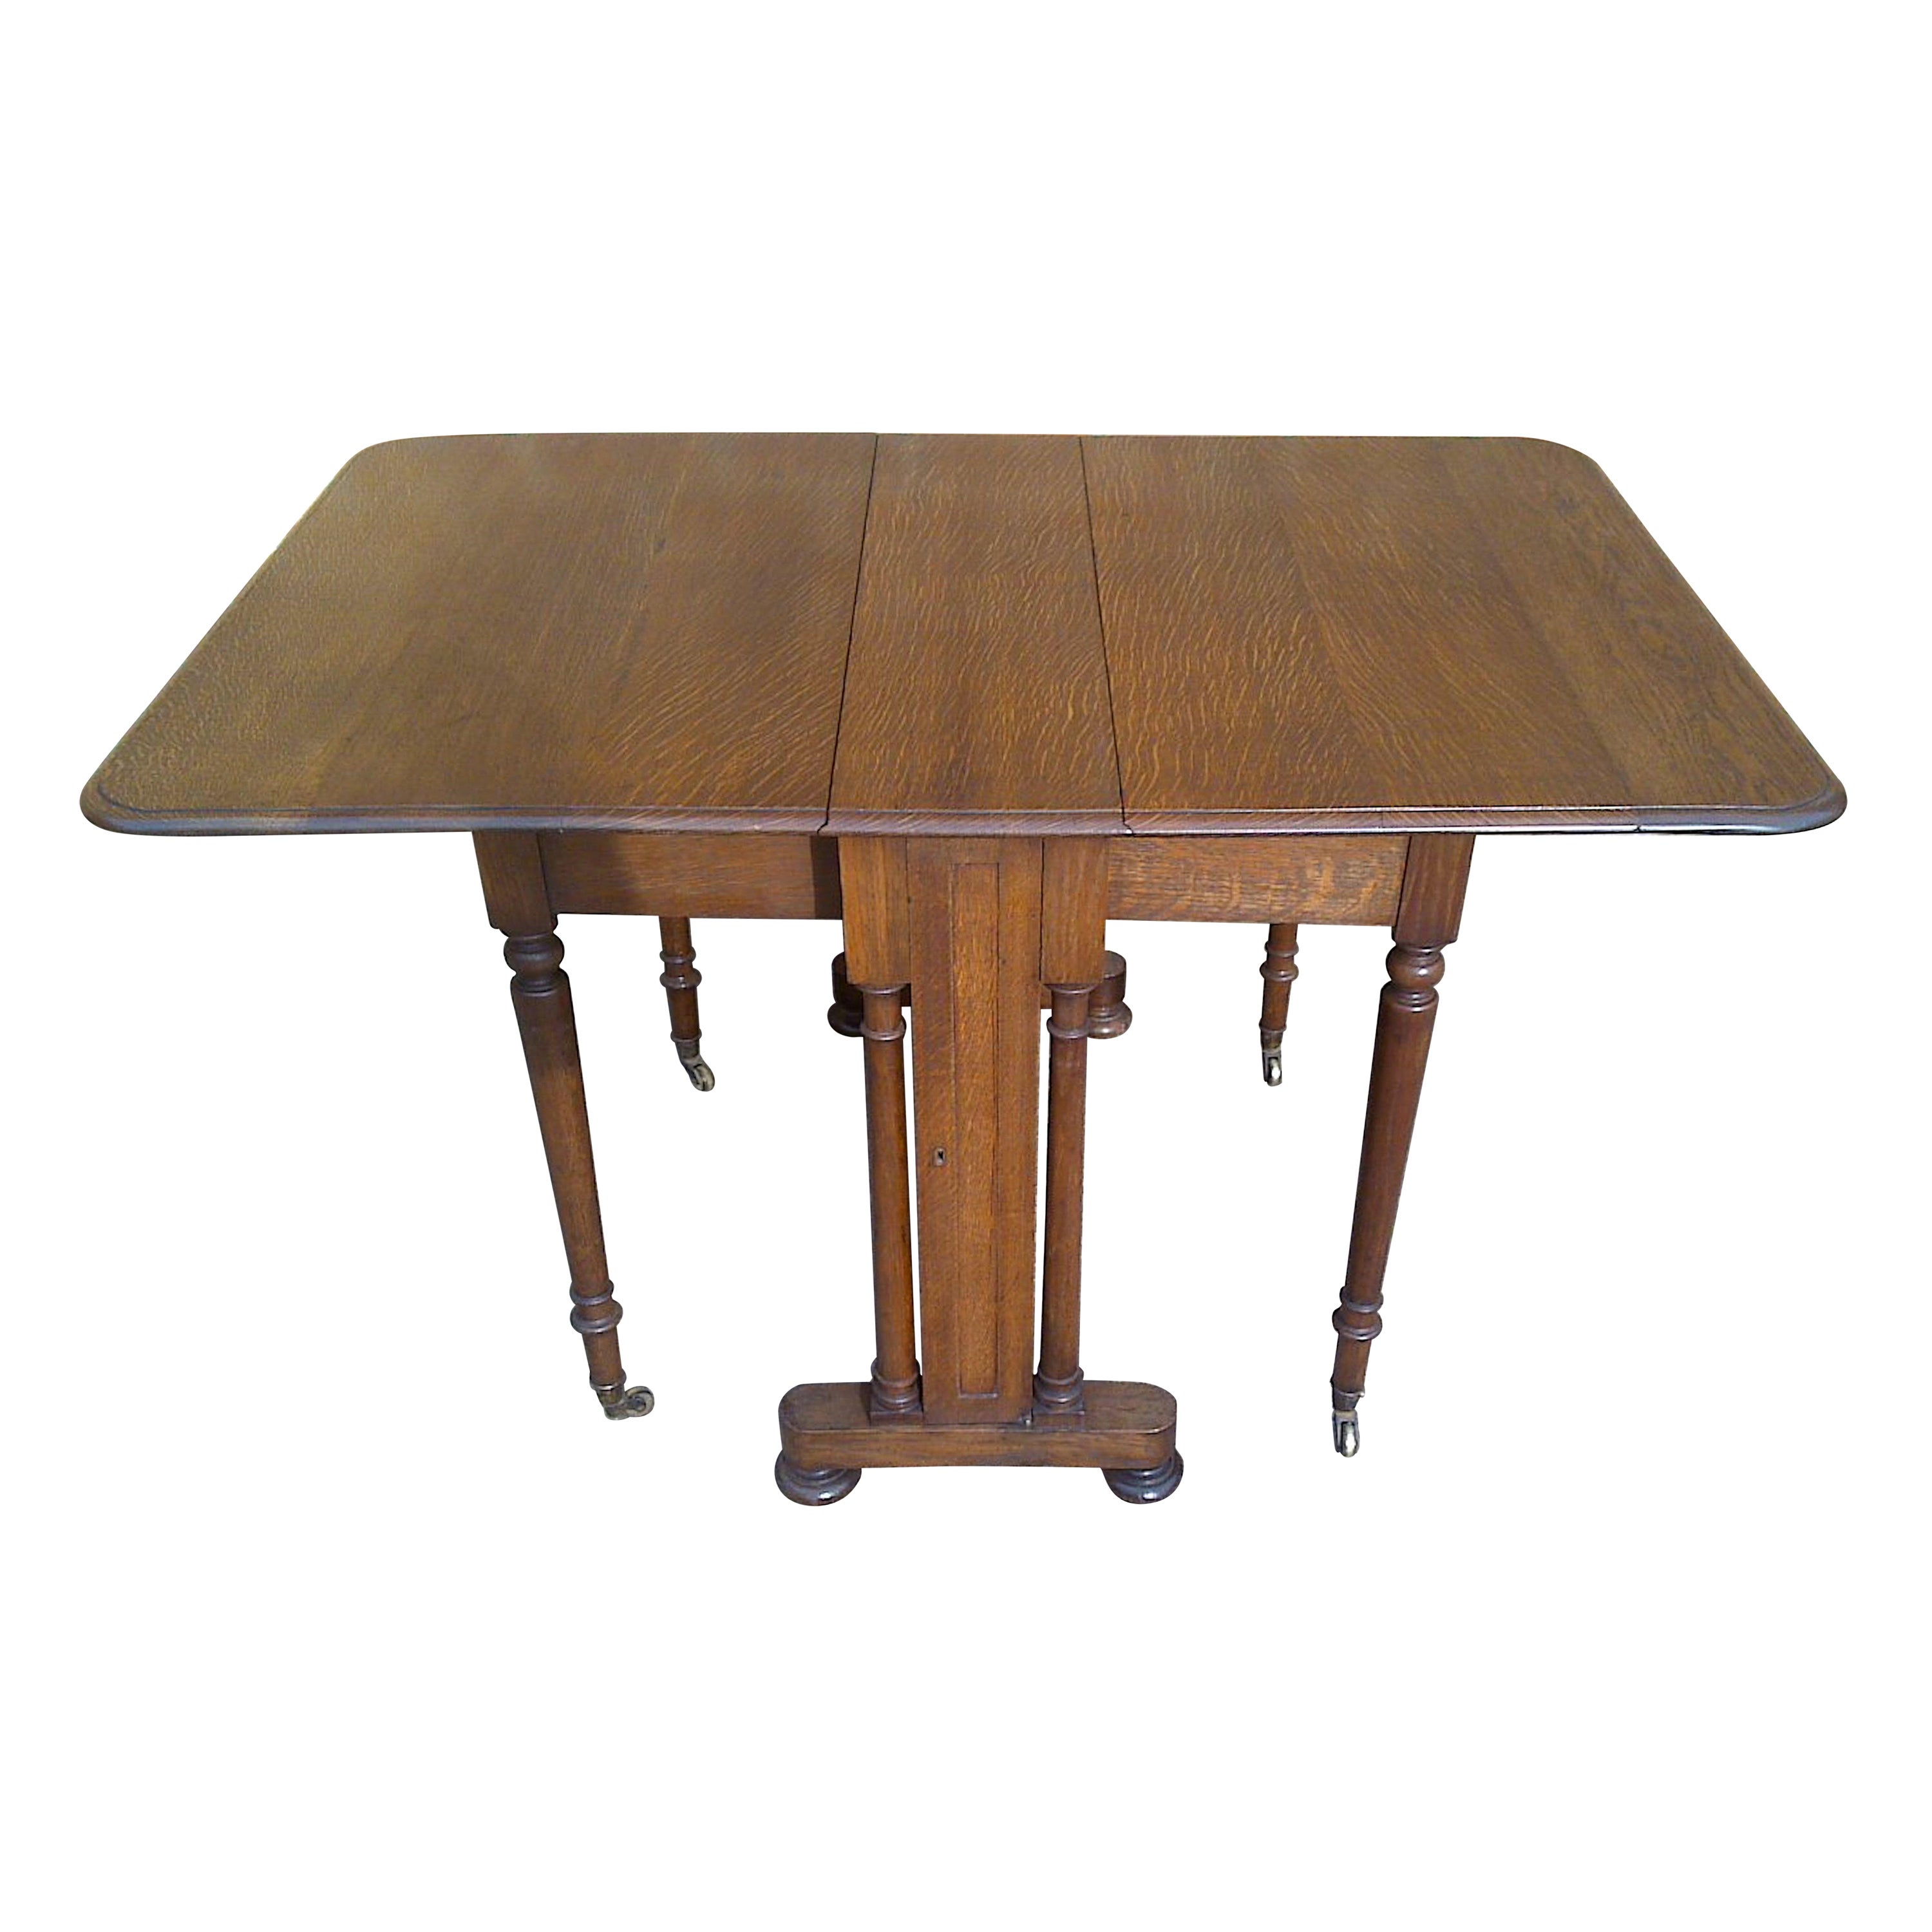 C Hindleys 134 Oxford St. London, a Quality Drop Leaf Victorian Oak Dining Table